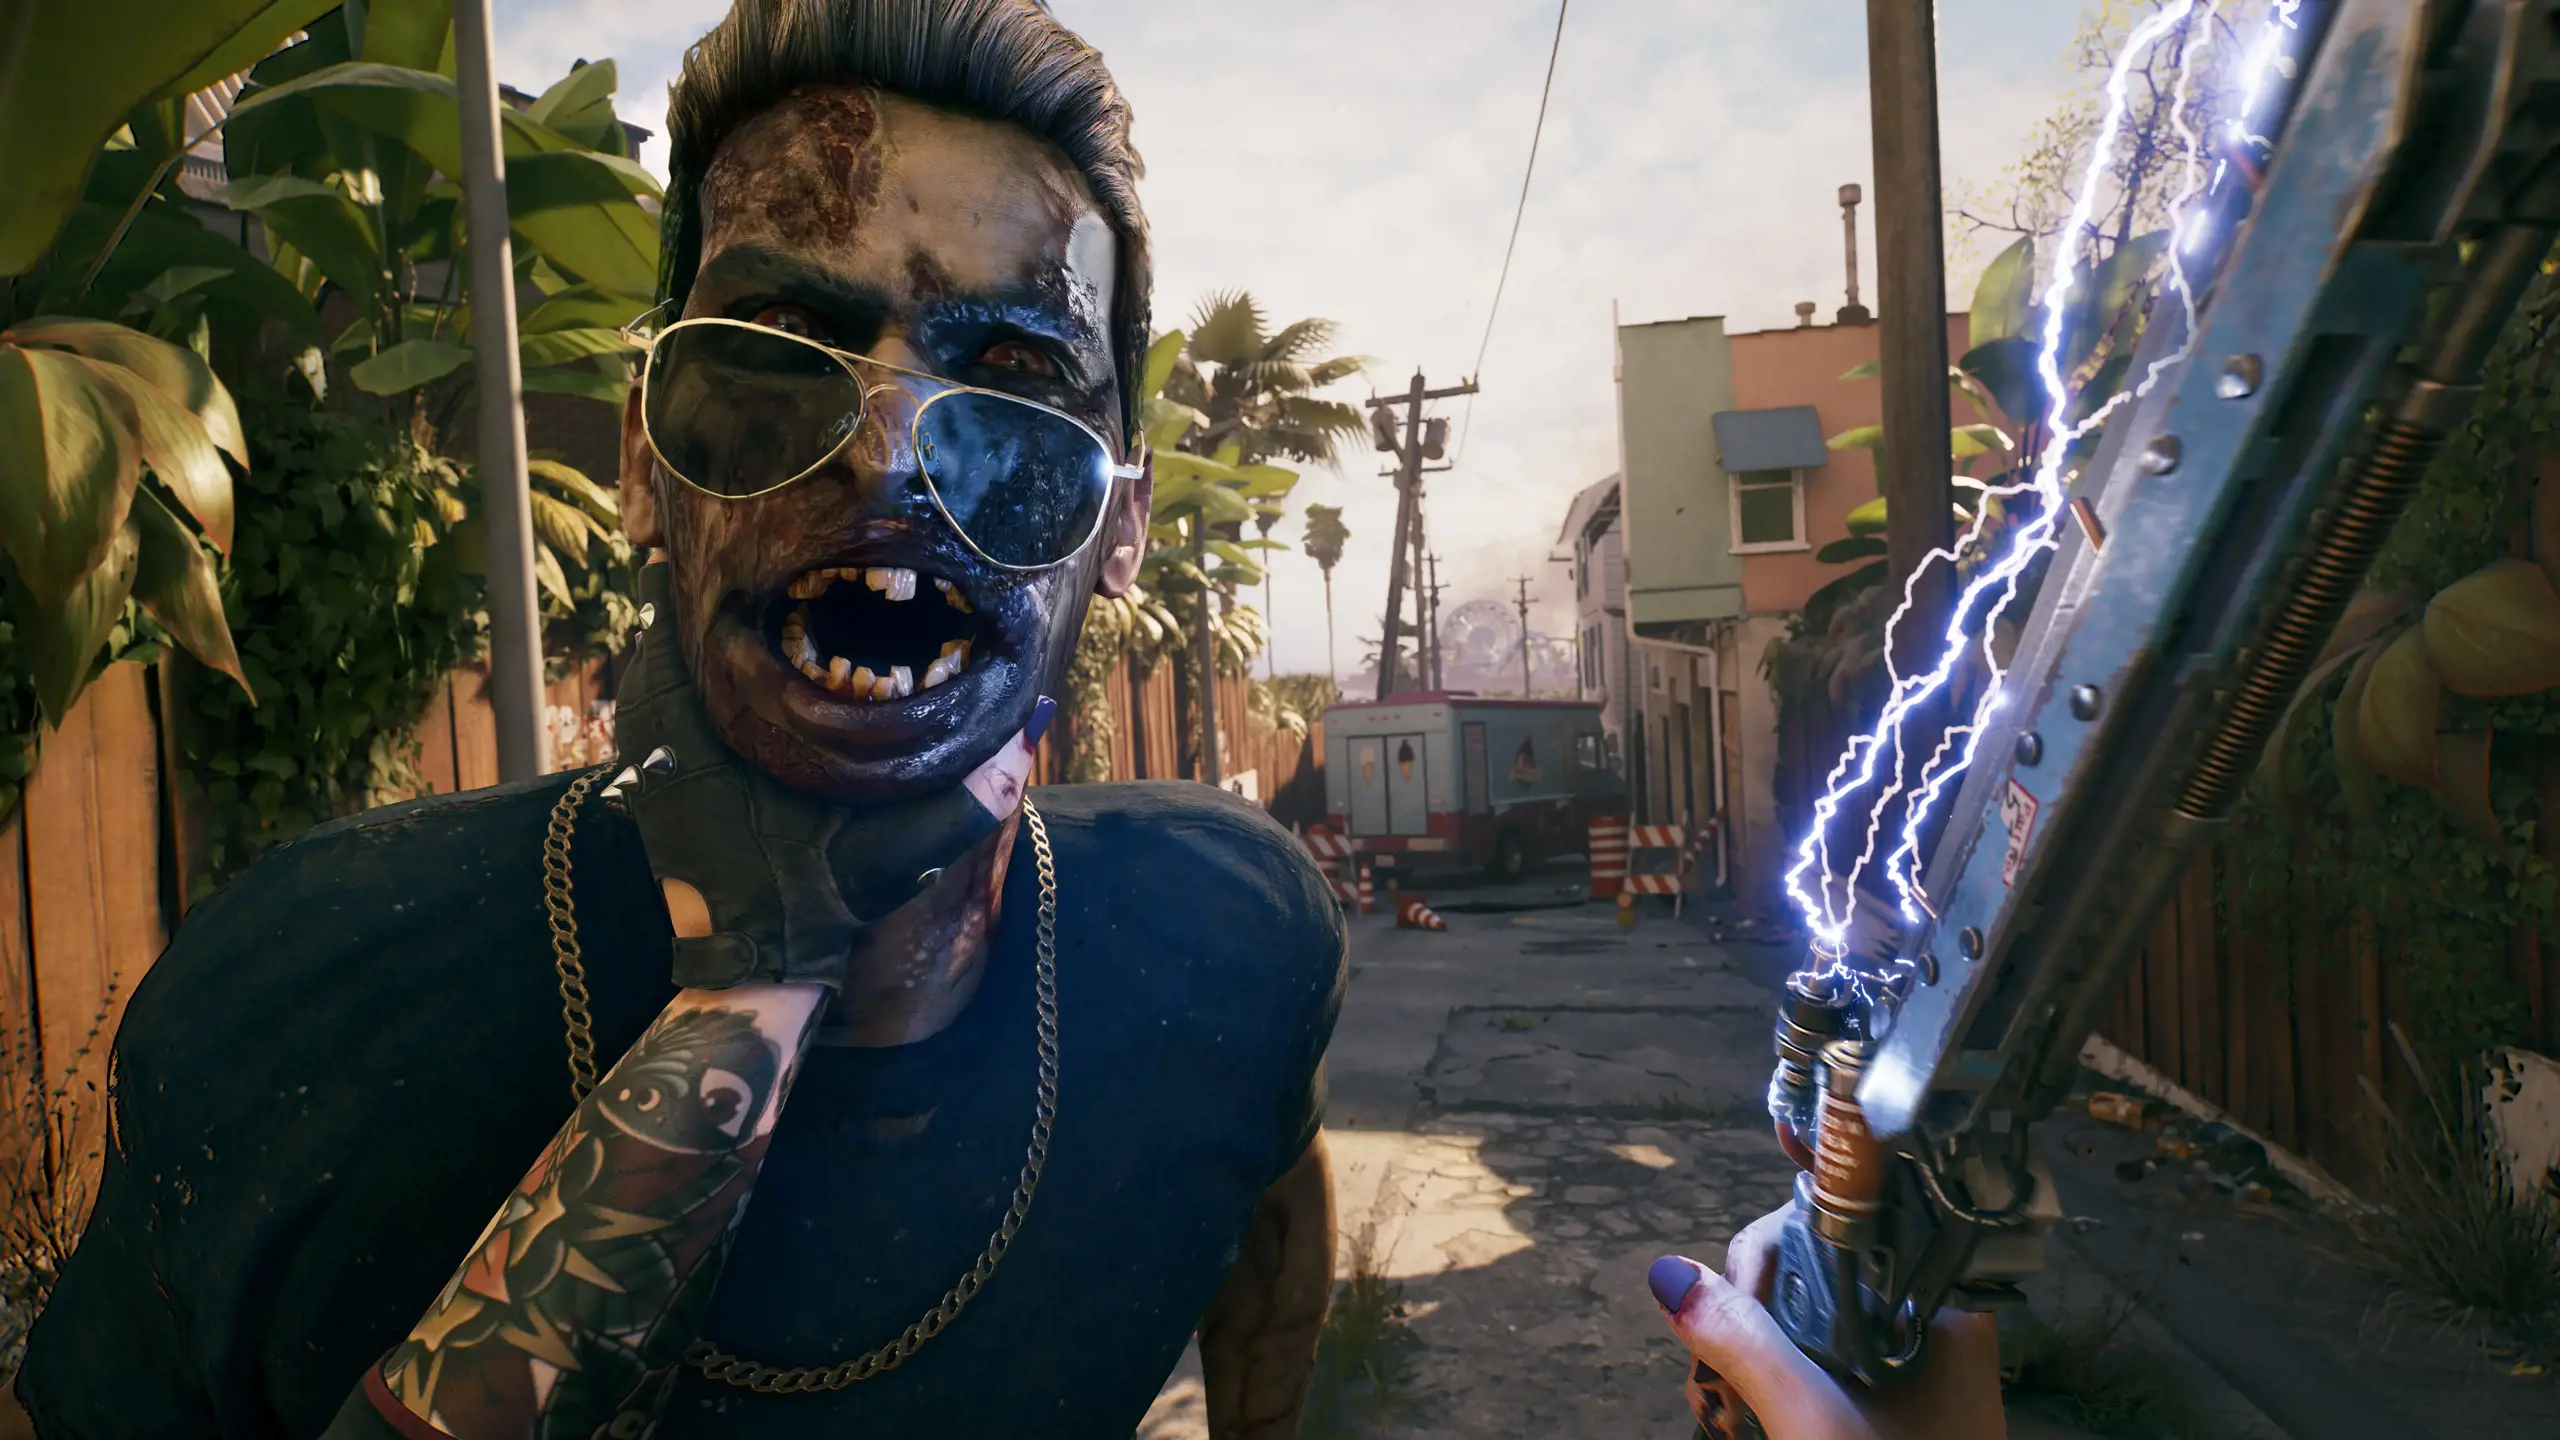 Dead Island 2 release date, launch time, cheapest prices, pre-load